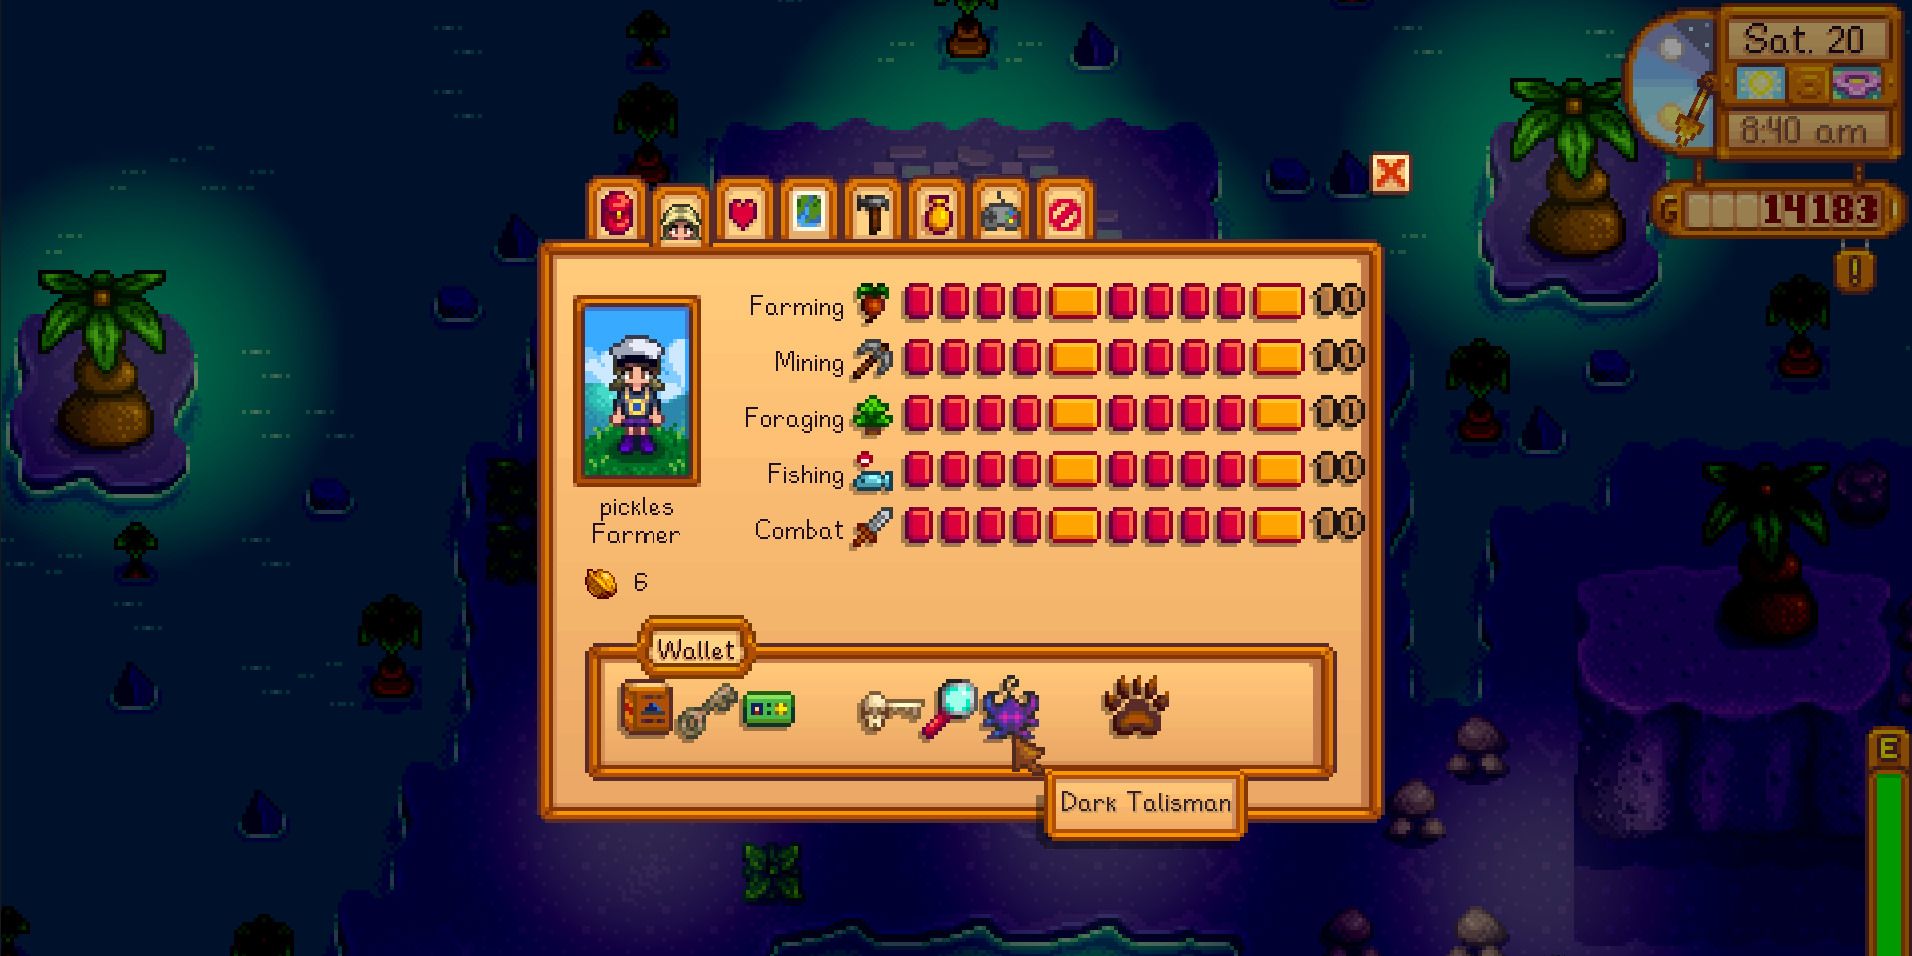 Image of the Dark Talisman object in the player's wallet in Stardew Valley